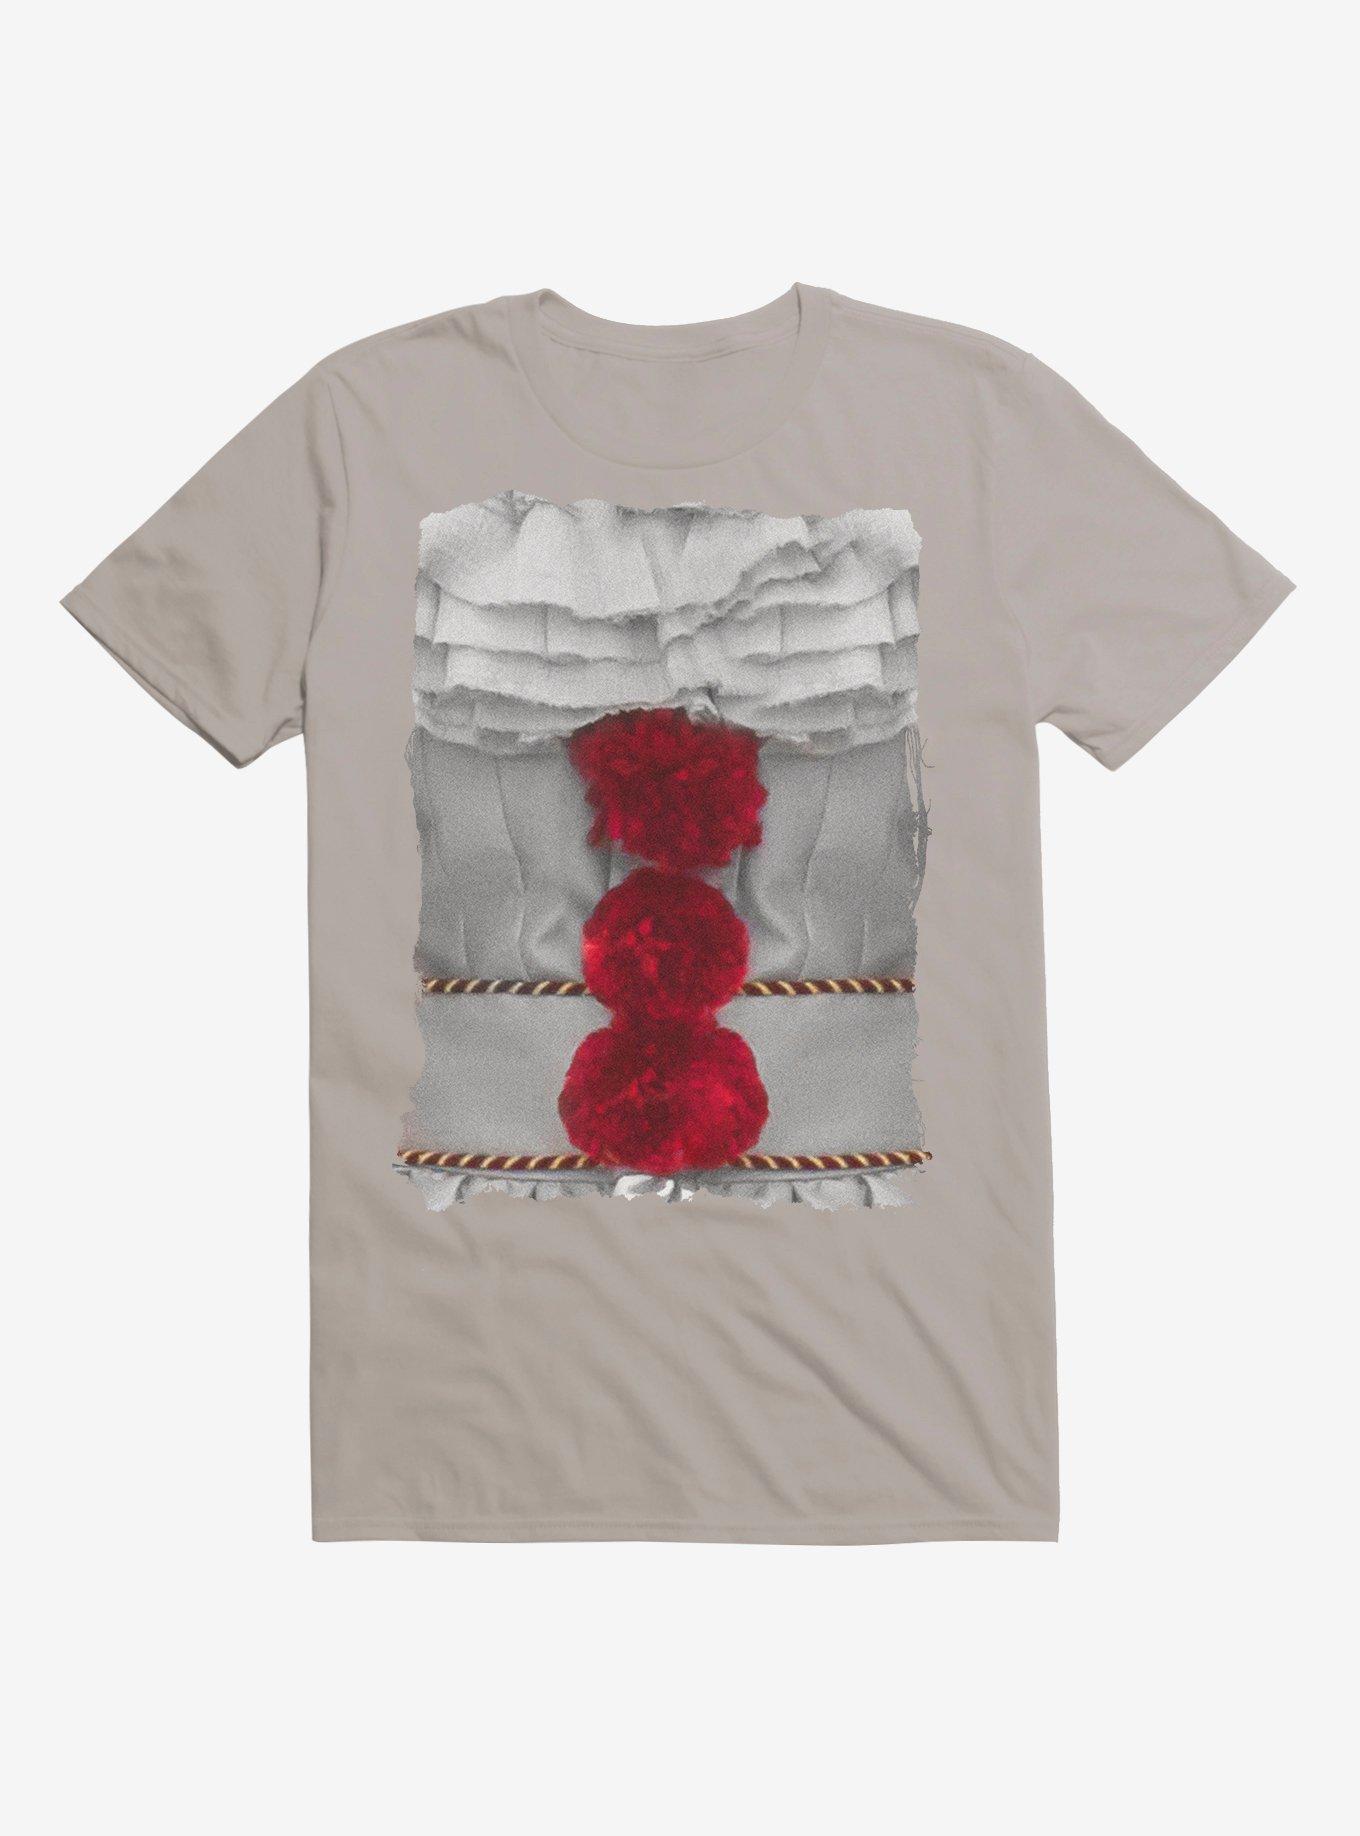 IT Chapter 2 Pennywise Cosplay T-Shirt, LIGHT GREY, hi-res